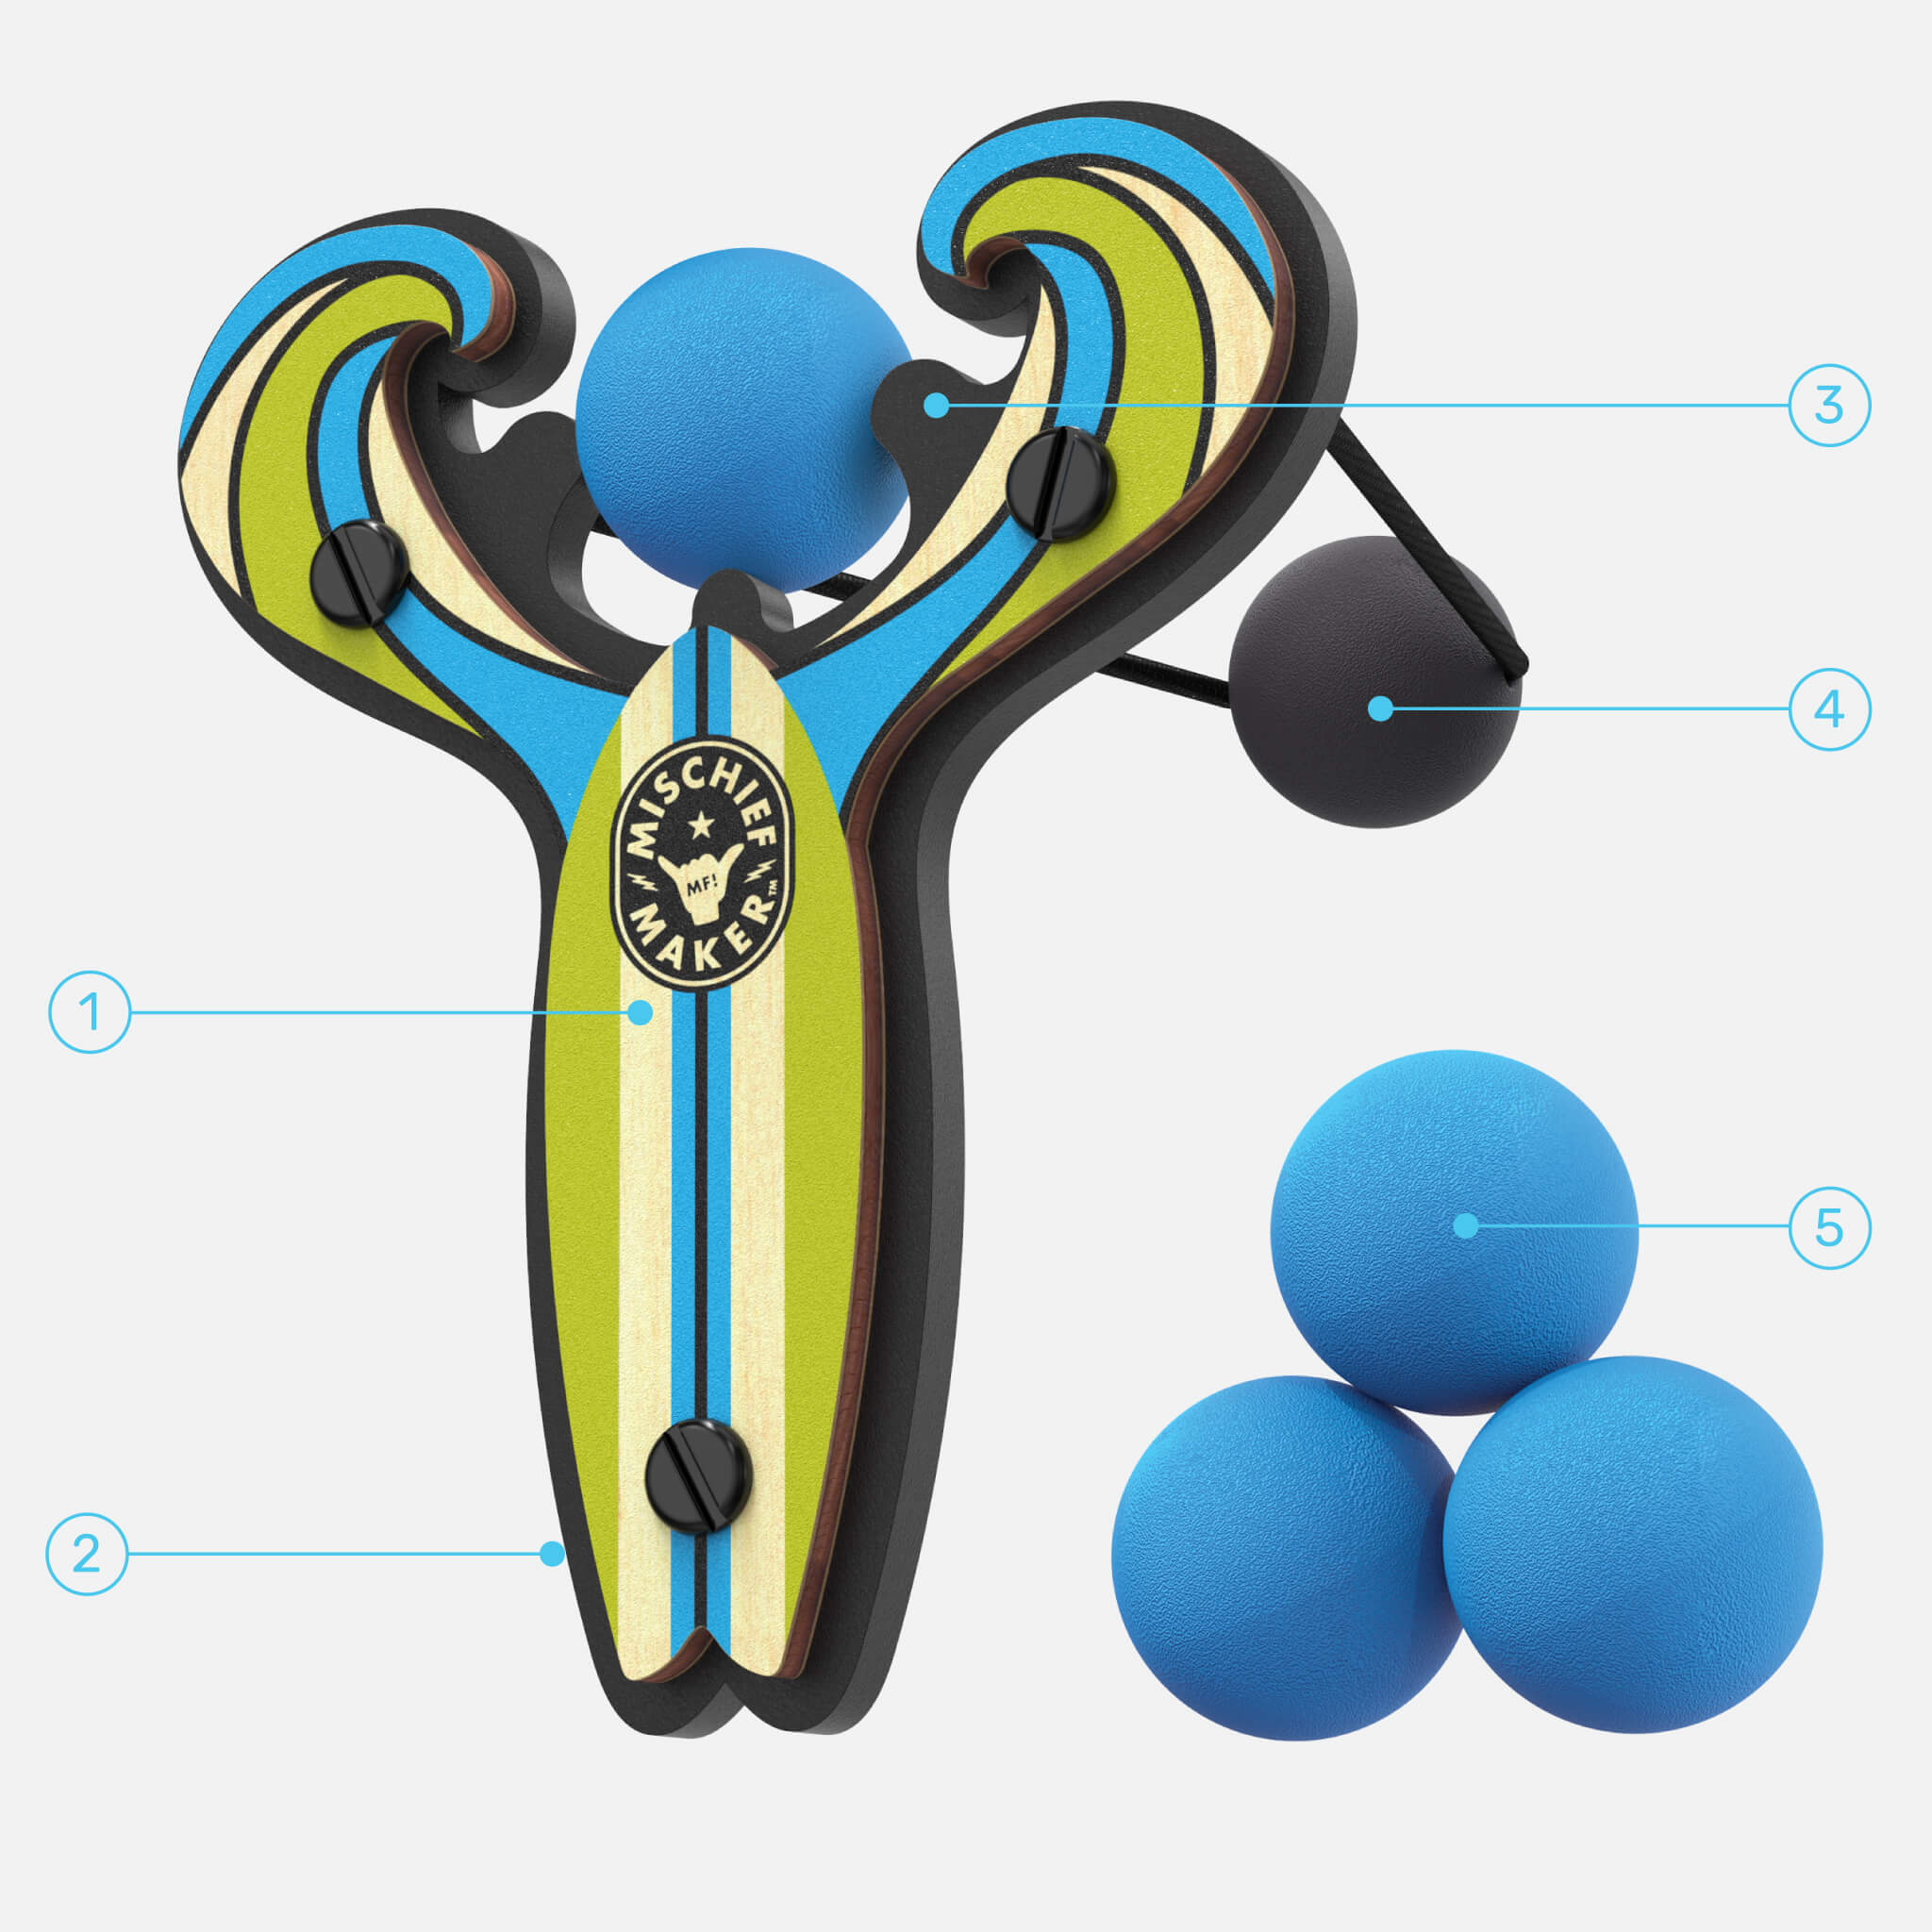 Blue Surf’s Up toy slingshot with 4 soft foam balls with callout details. Mischief Maker by Mighty Fun!